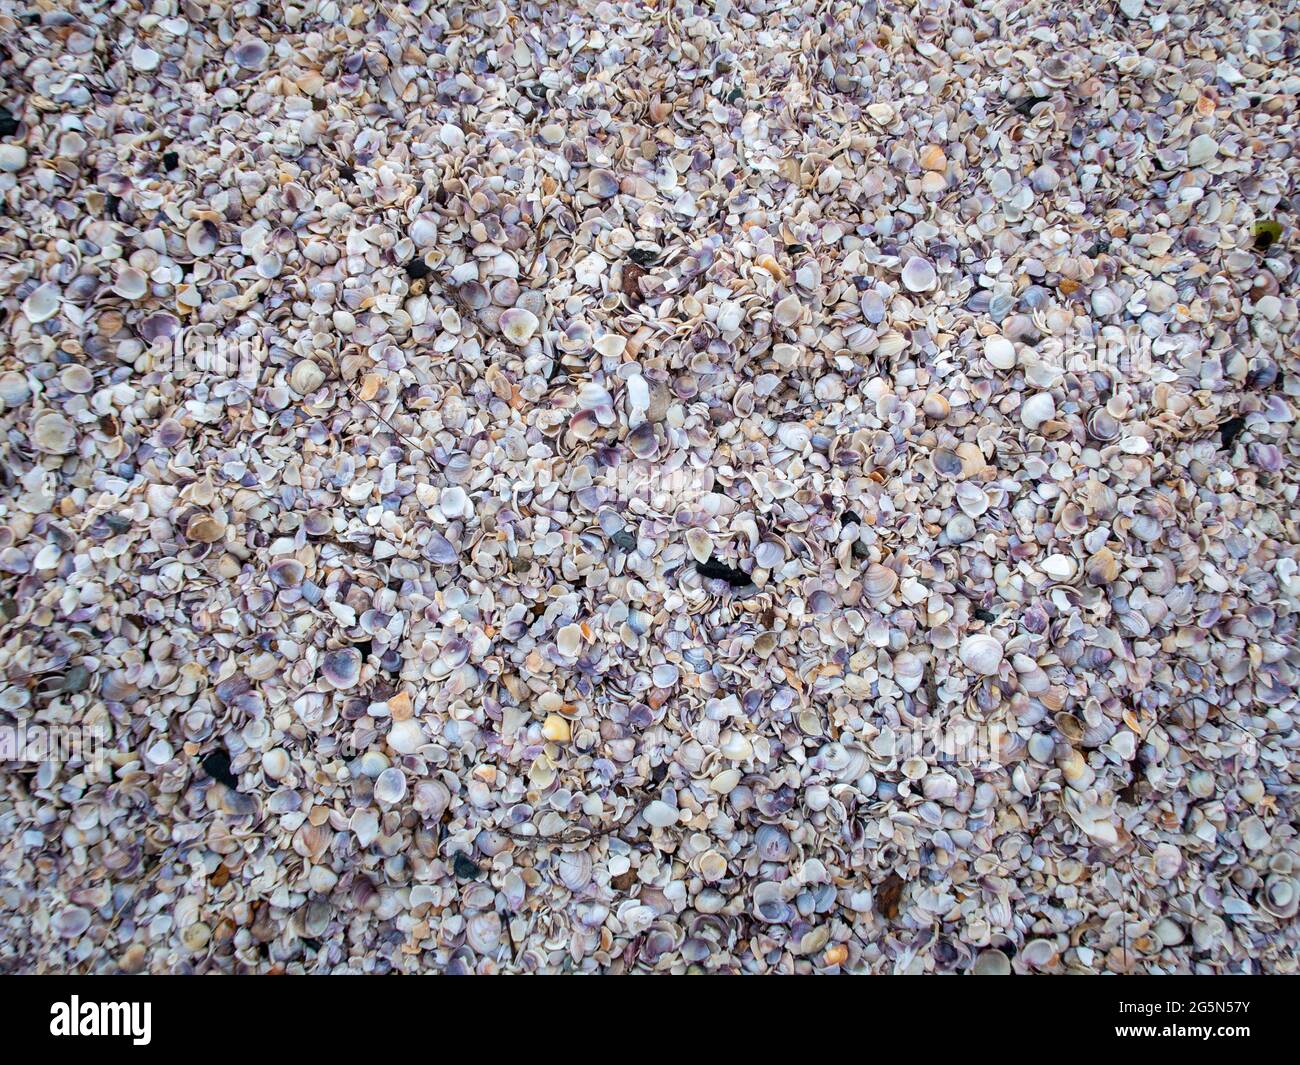 The beach at Shelly Bay in the Kaipara Harbour, Auckland, is made up of tiny shells washed up from the sea. New Zealand beach holiday destination. Stock Photo